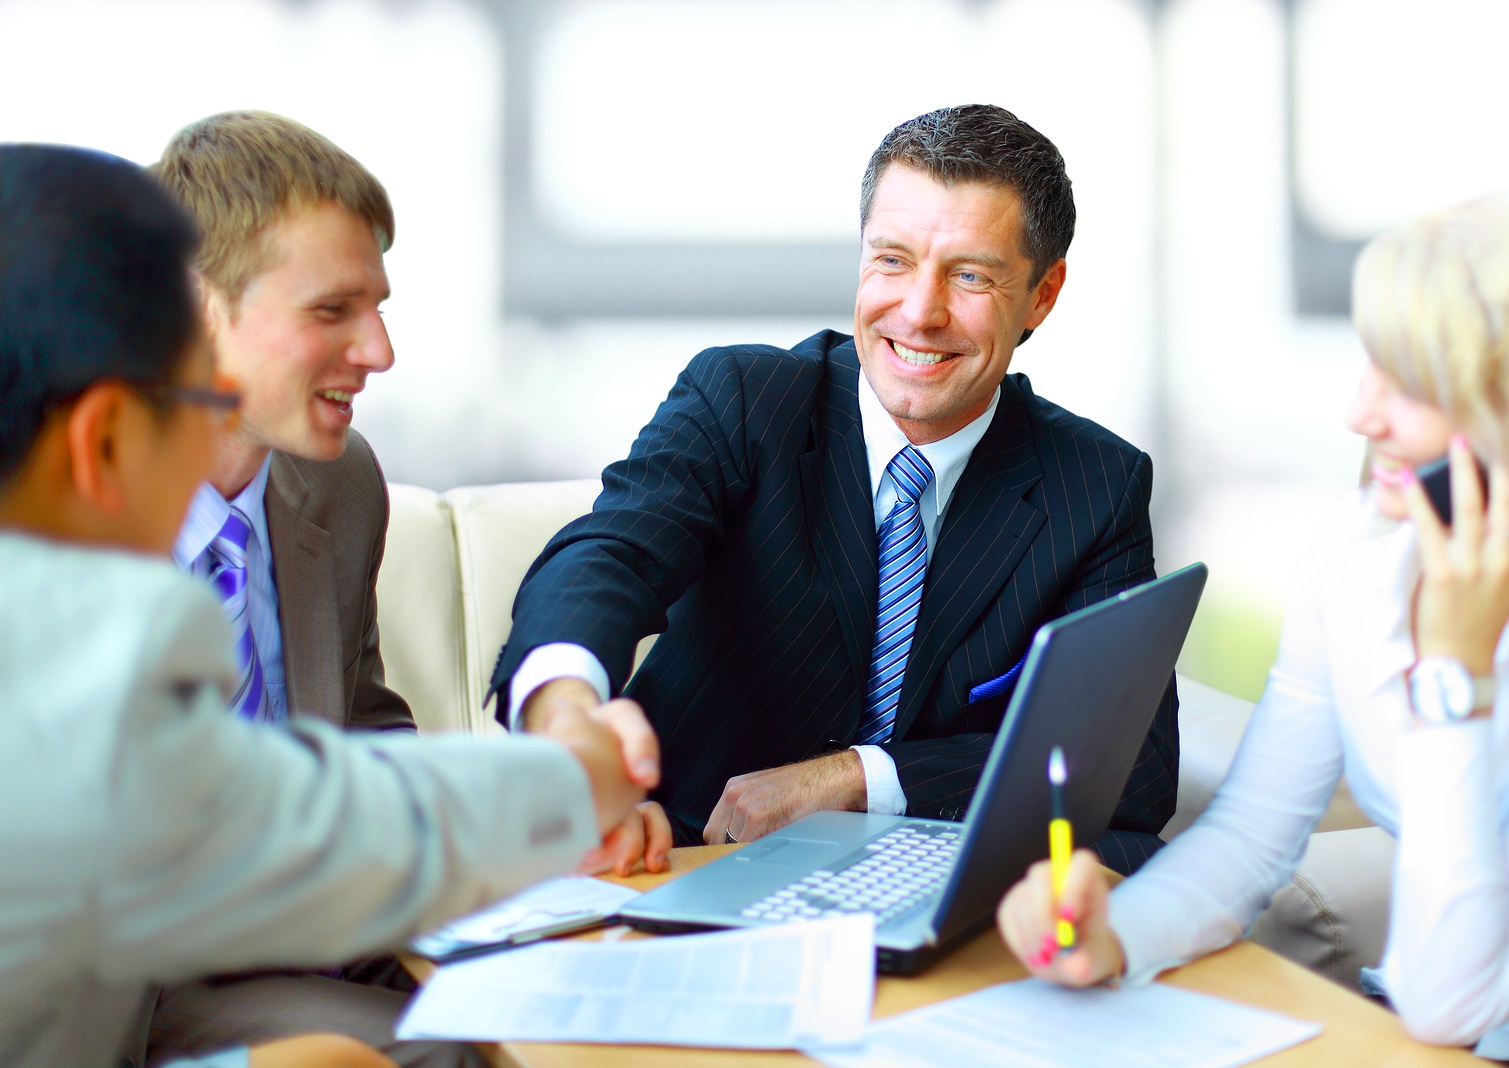 men shaking hands in business meeting | mergers and acquisitions